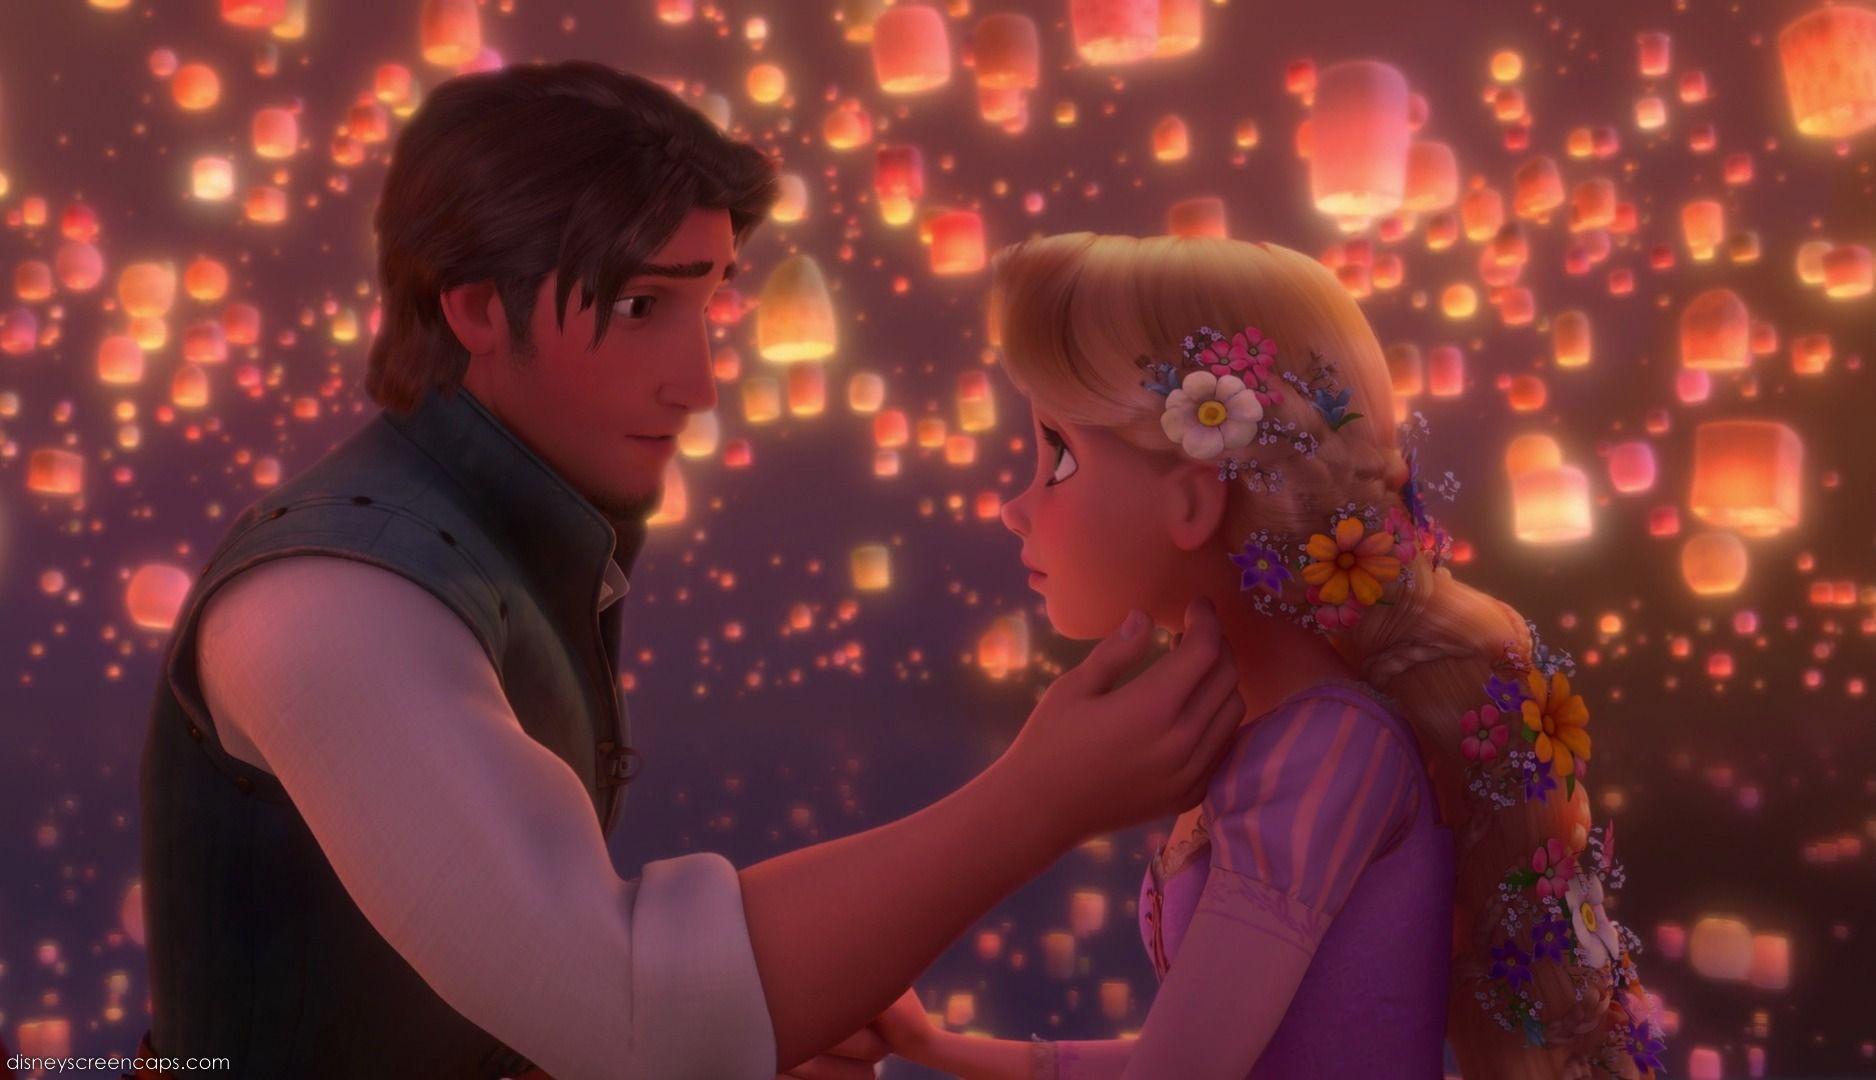 Most romantic scene ever! If I ever get married again.100% tangled